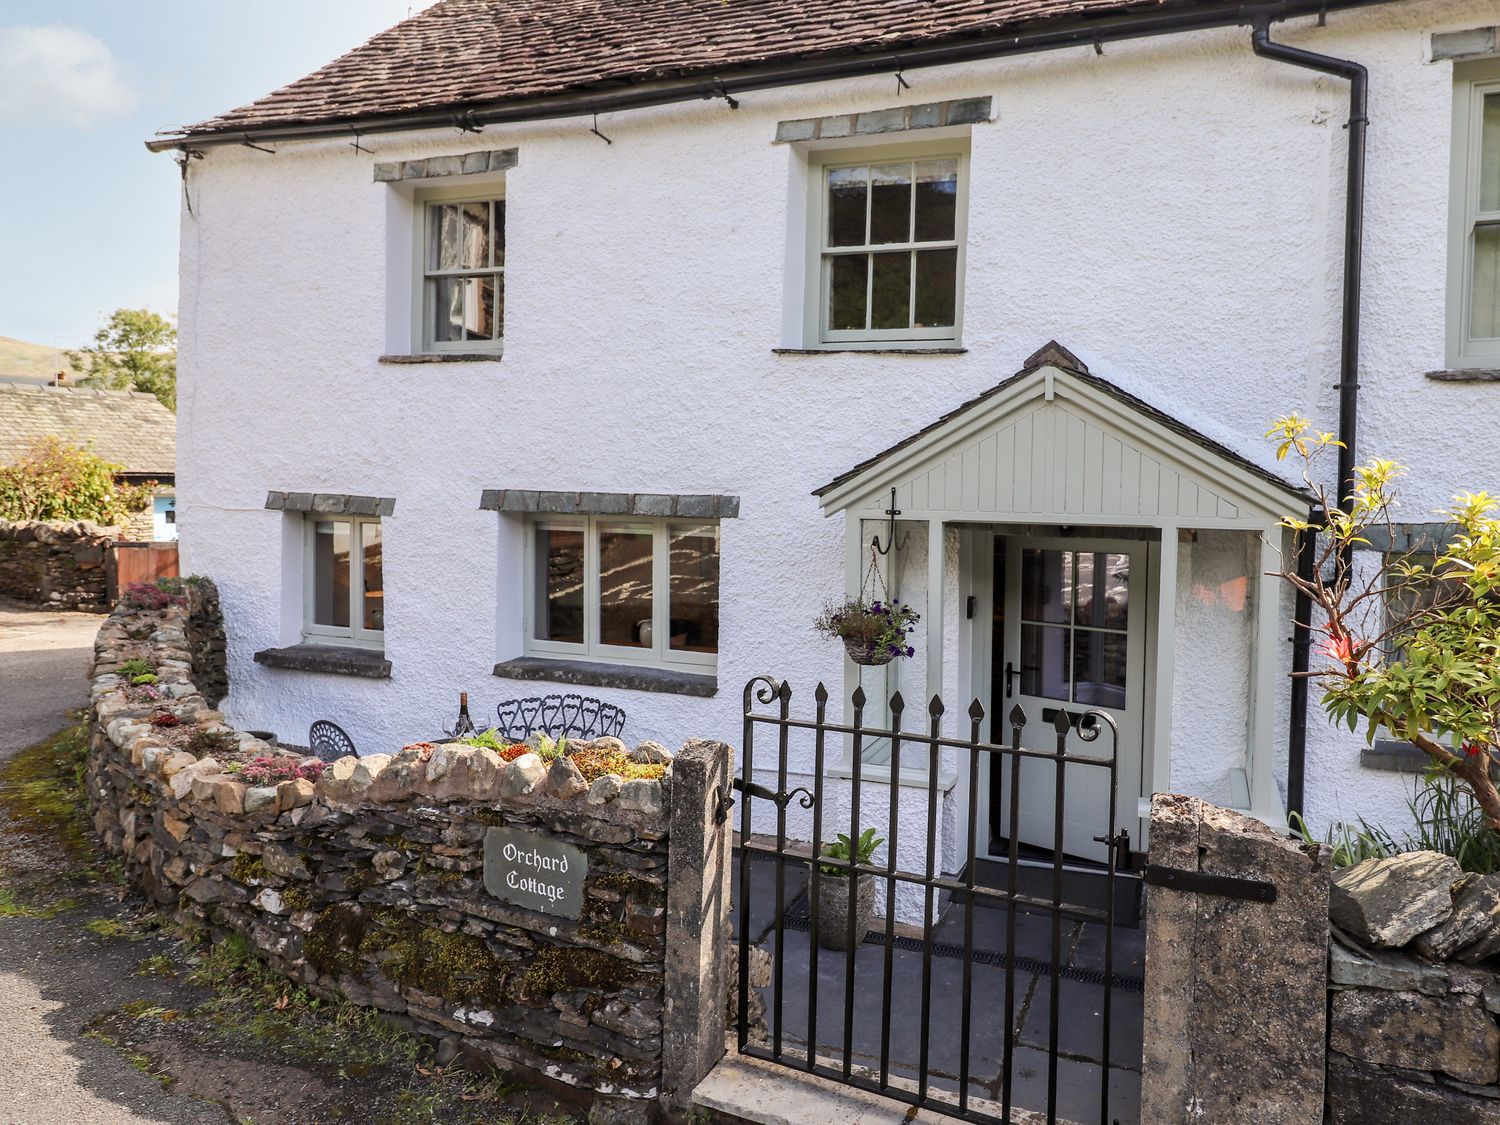 Orchard Cottage - Lake District - 1072470 - photo 1